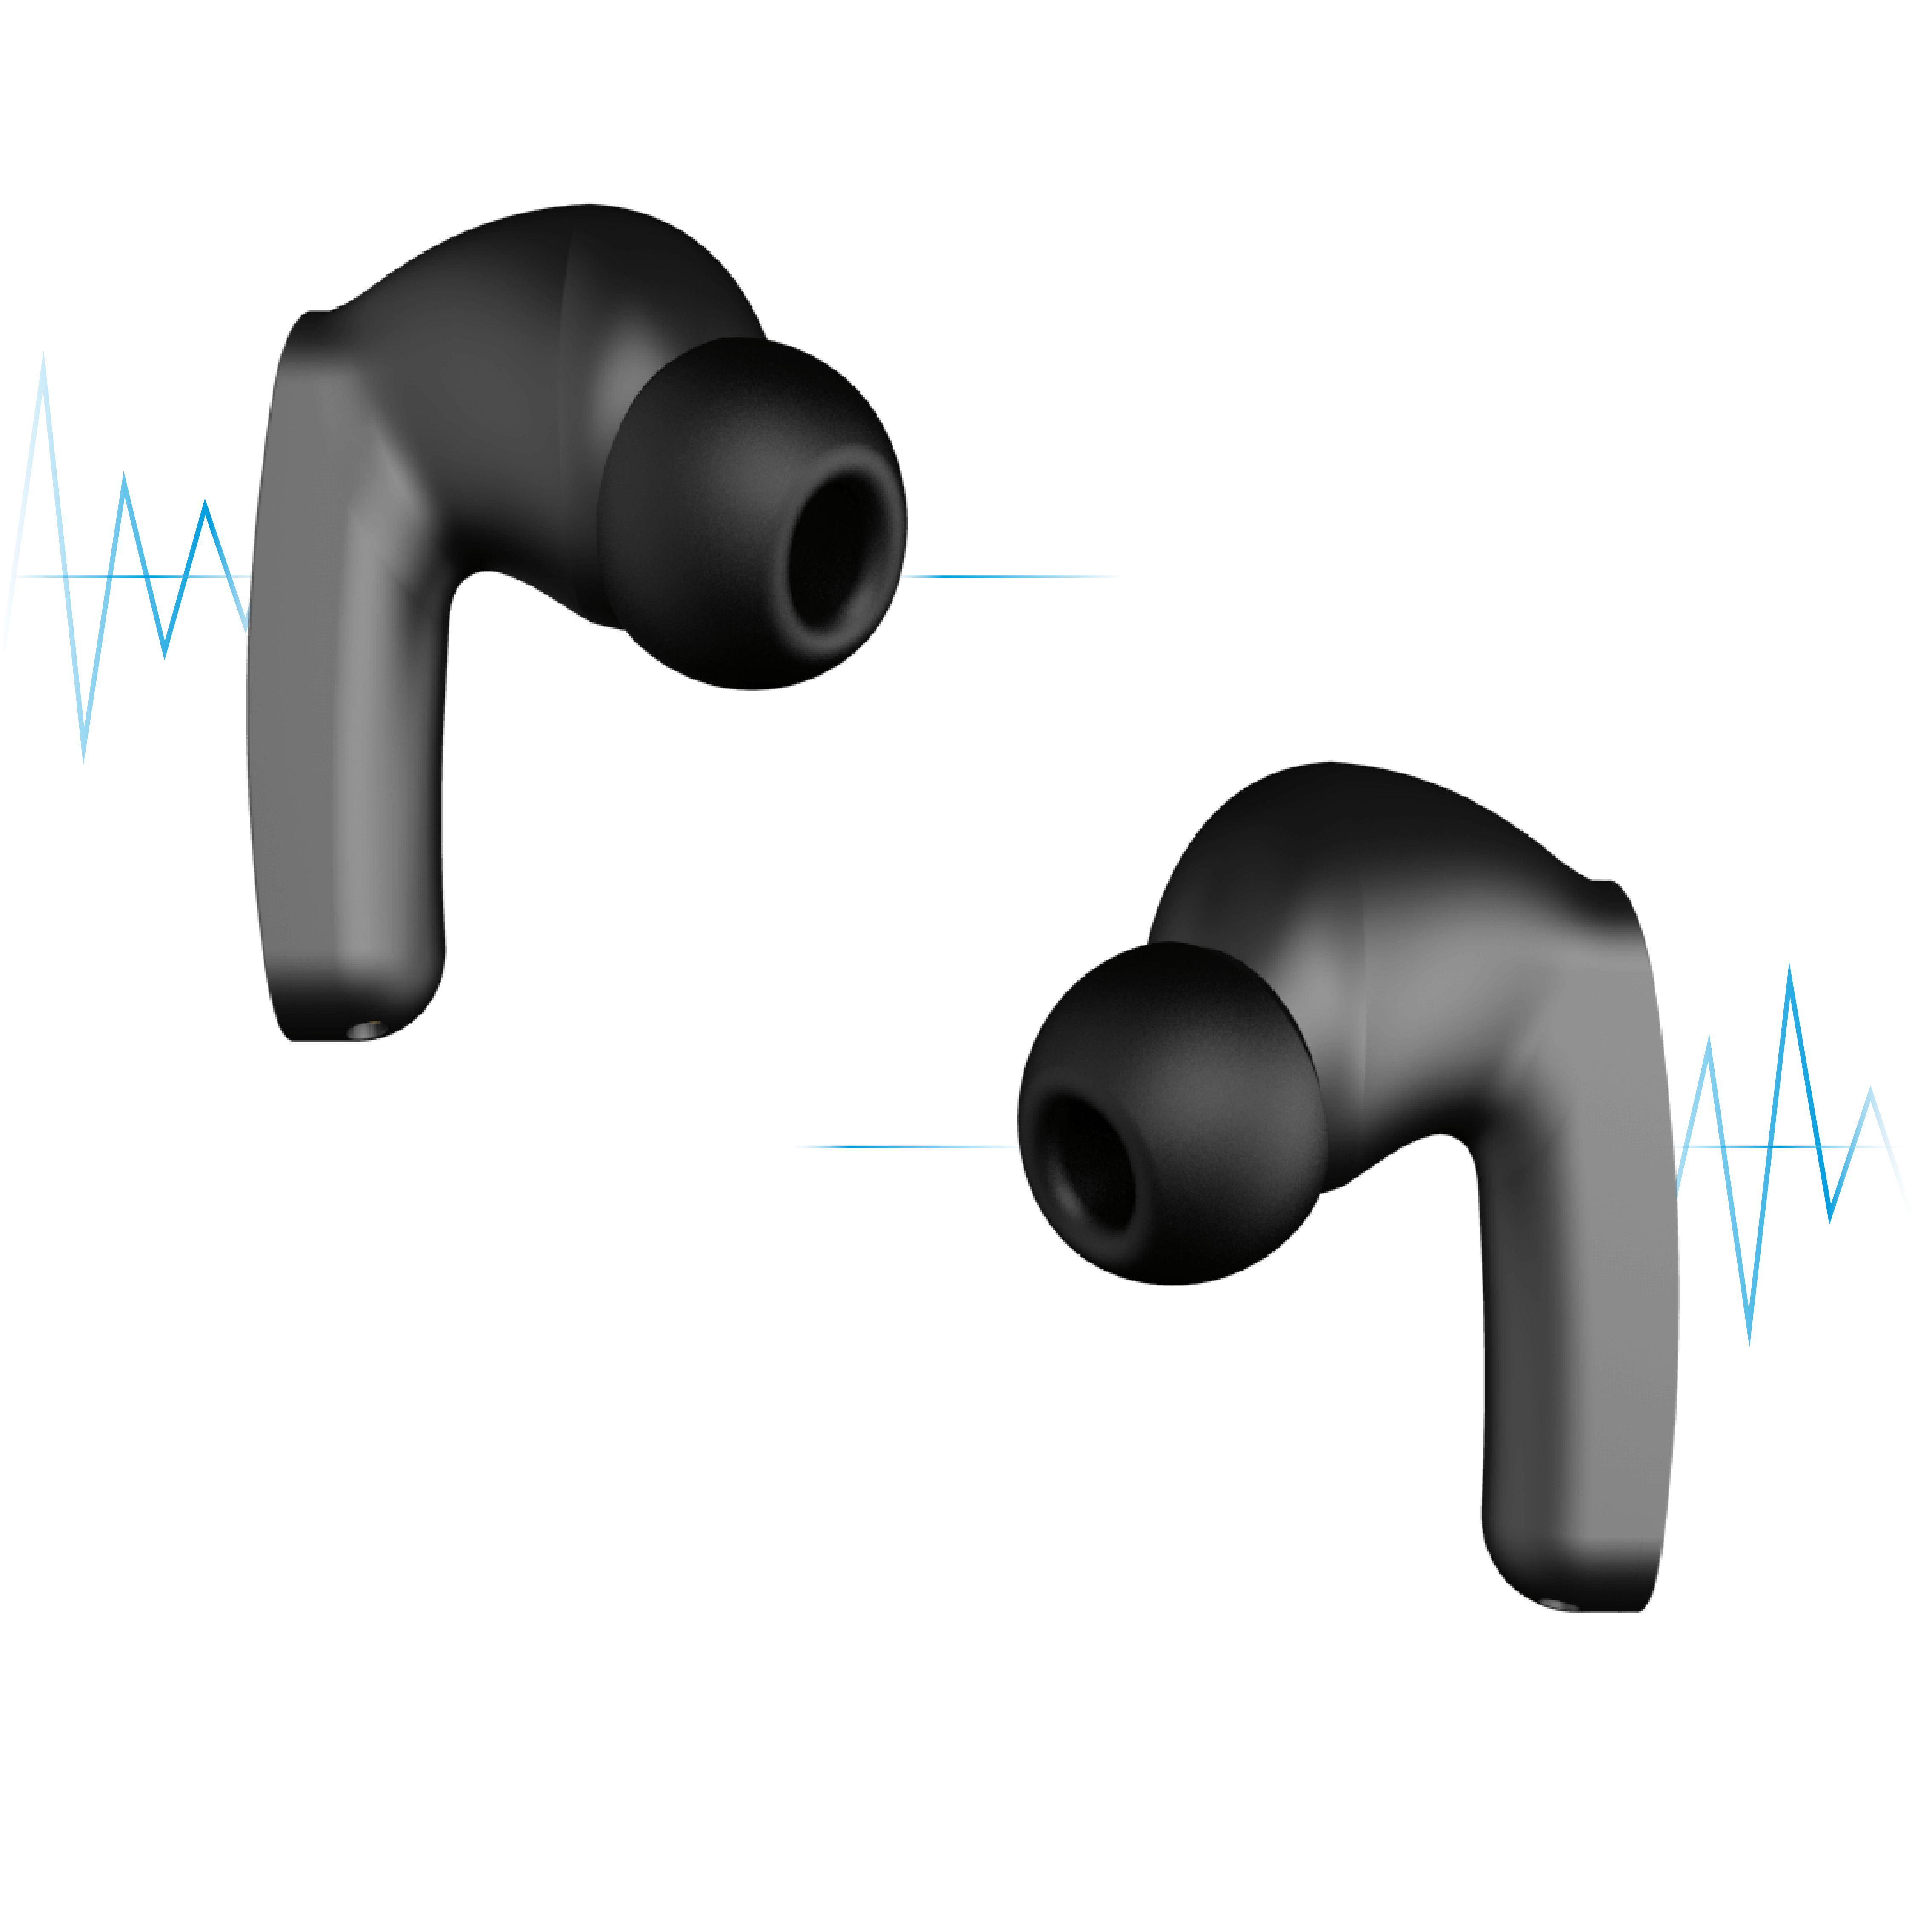 Active noise reduction on wireless earbuds